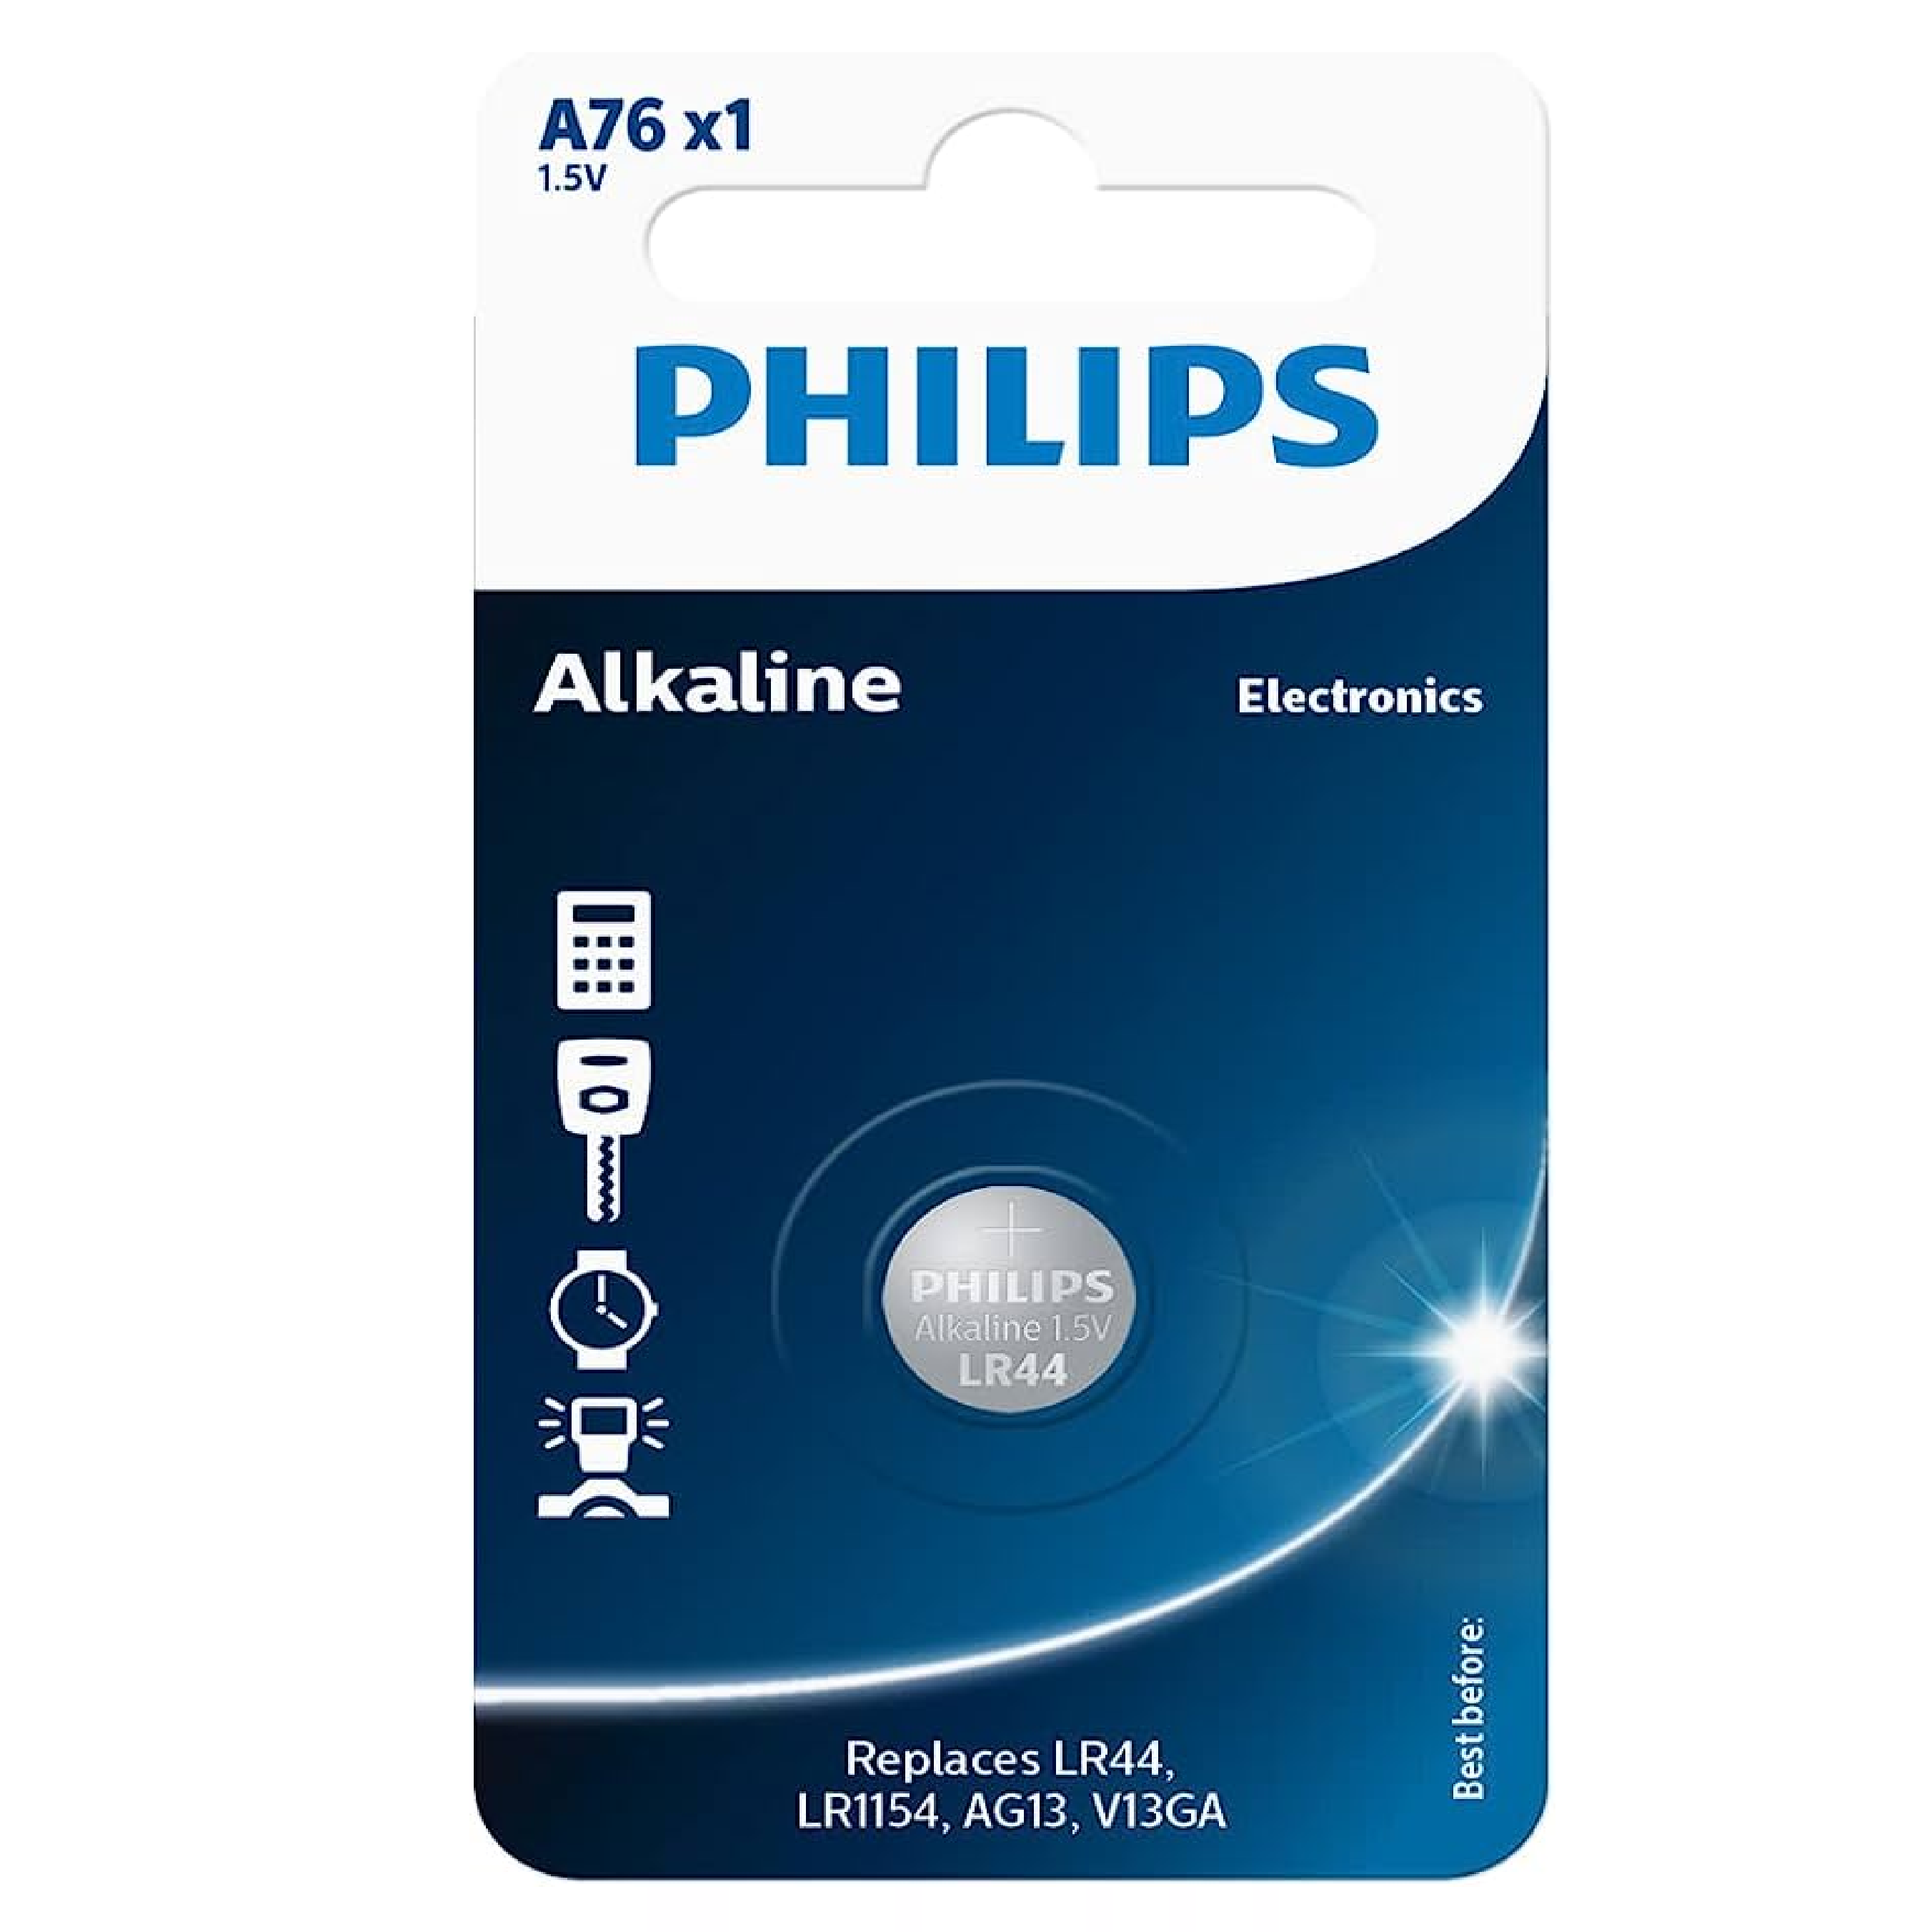 Philips 1.5V A76 BUTTON Cell Battery